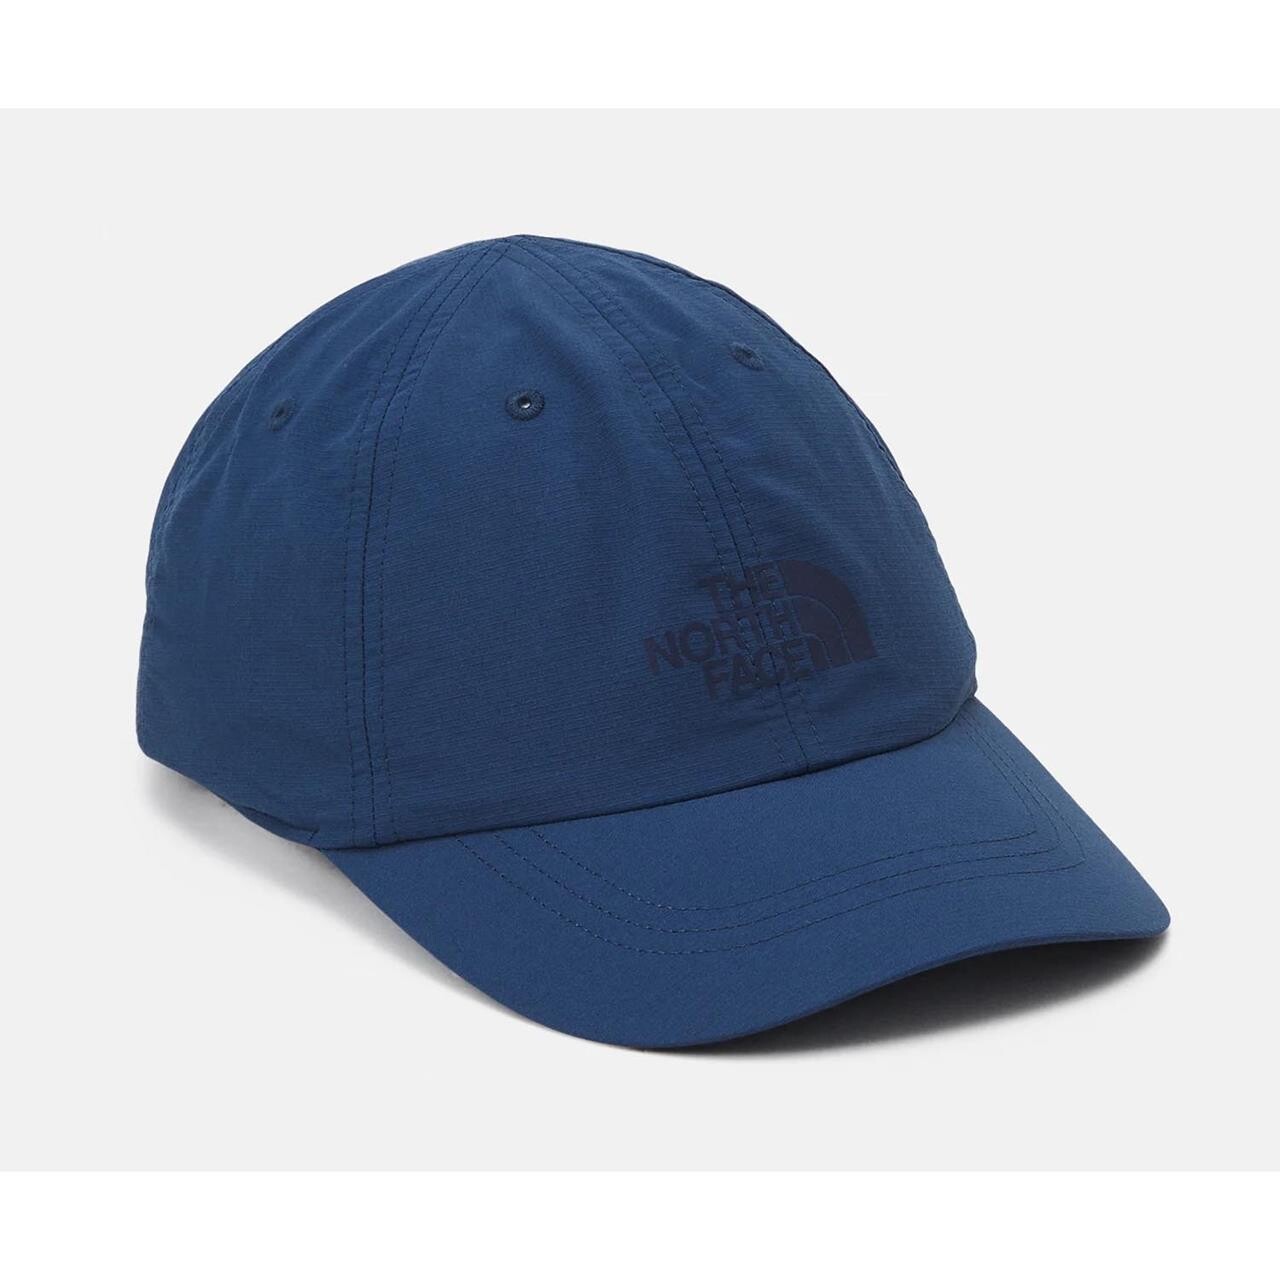 11: The North Face Horizon Hat (Blå (SHADY BLUE) One size)